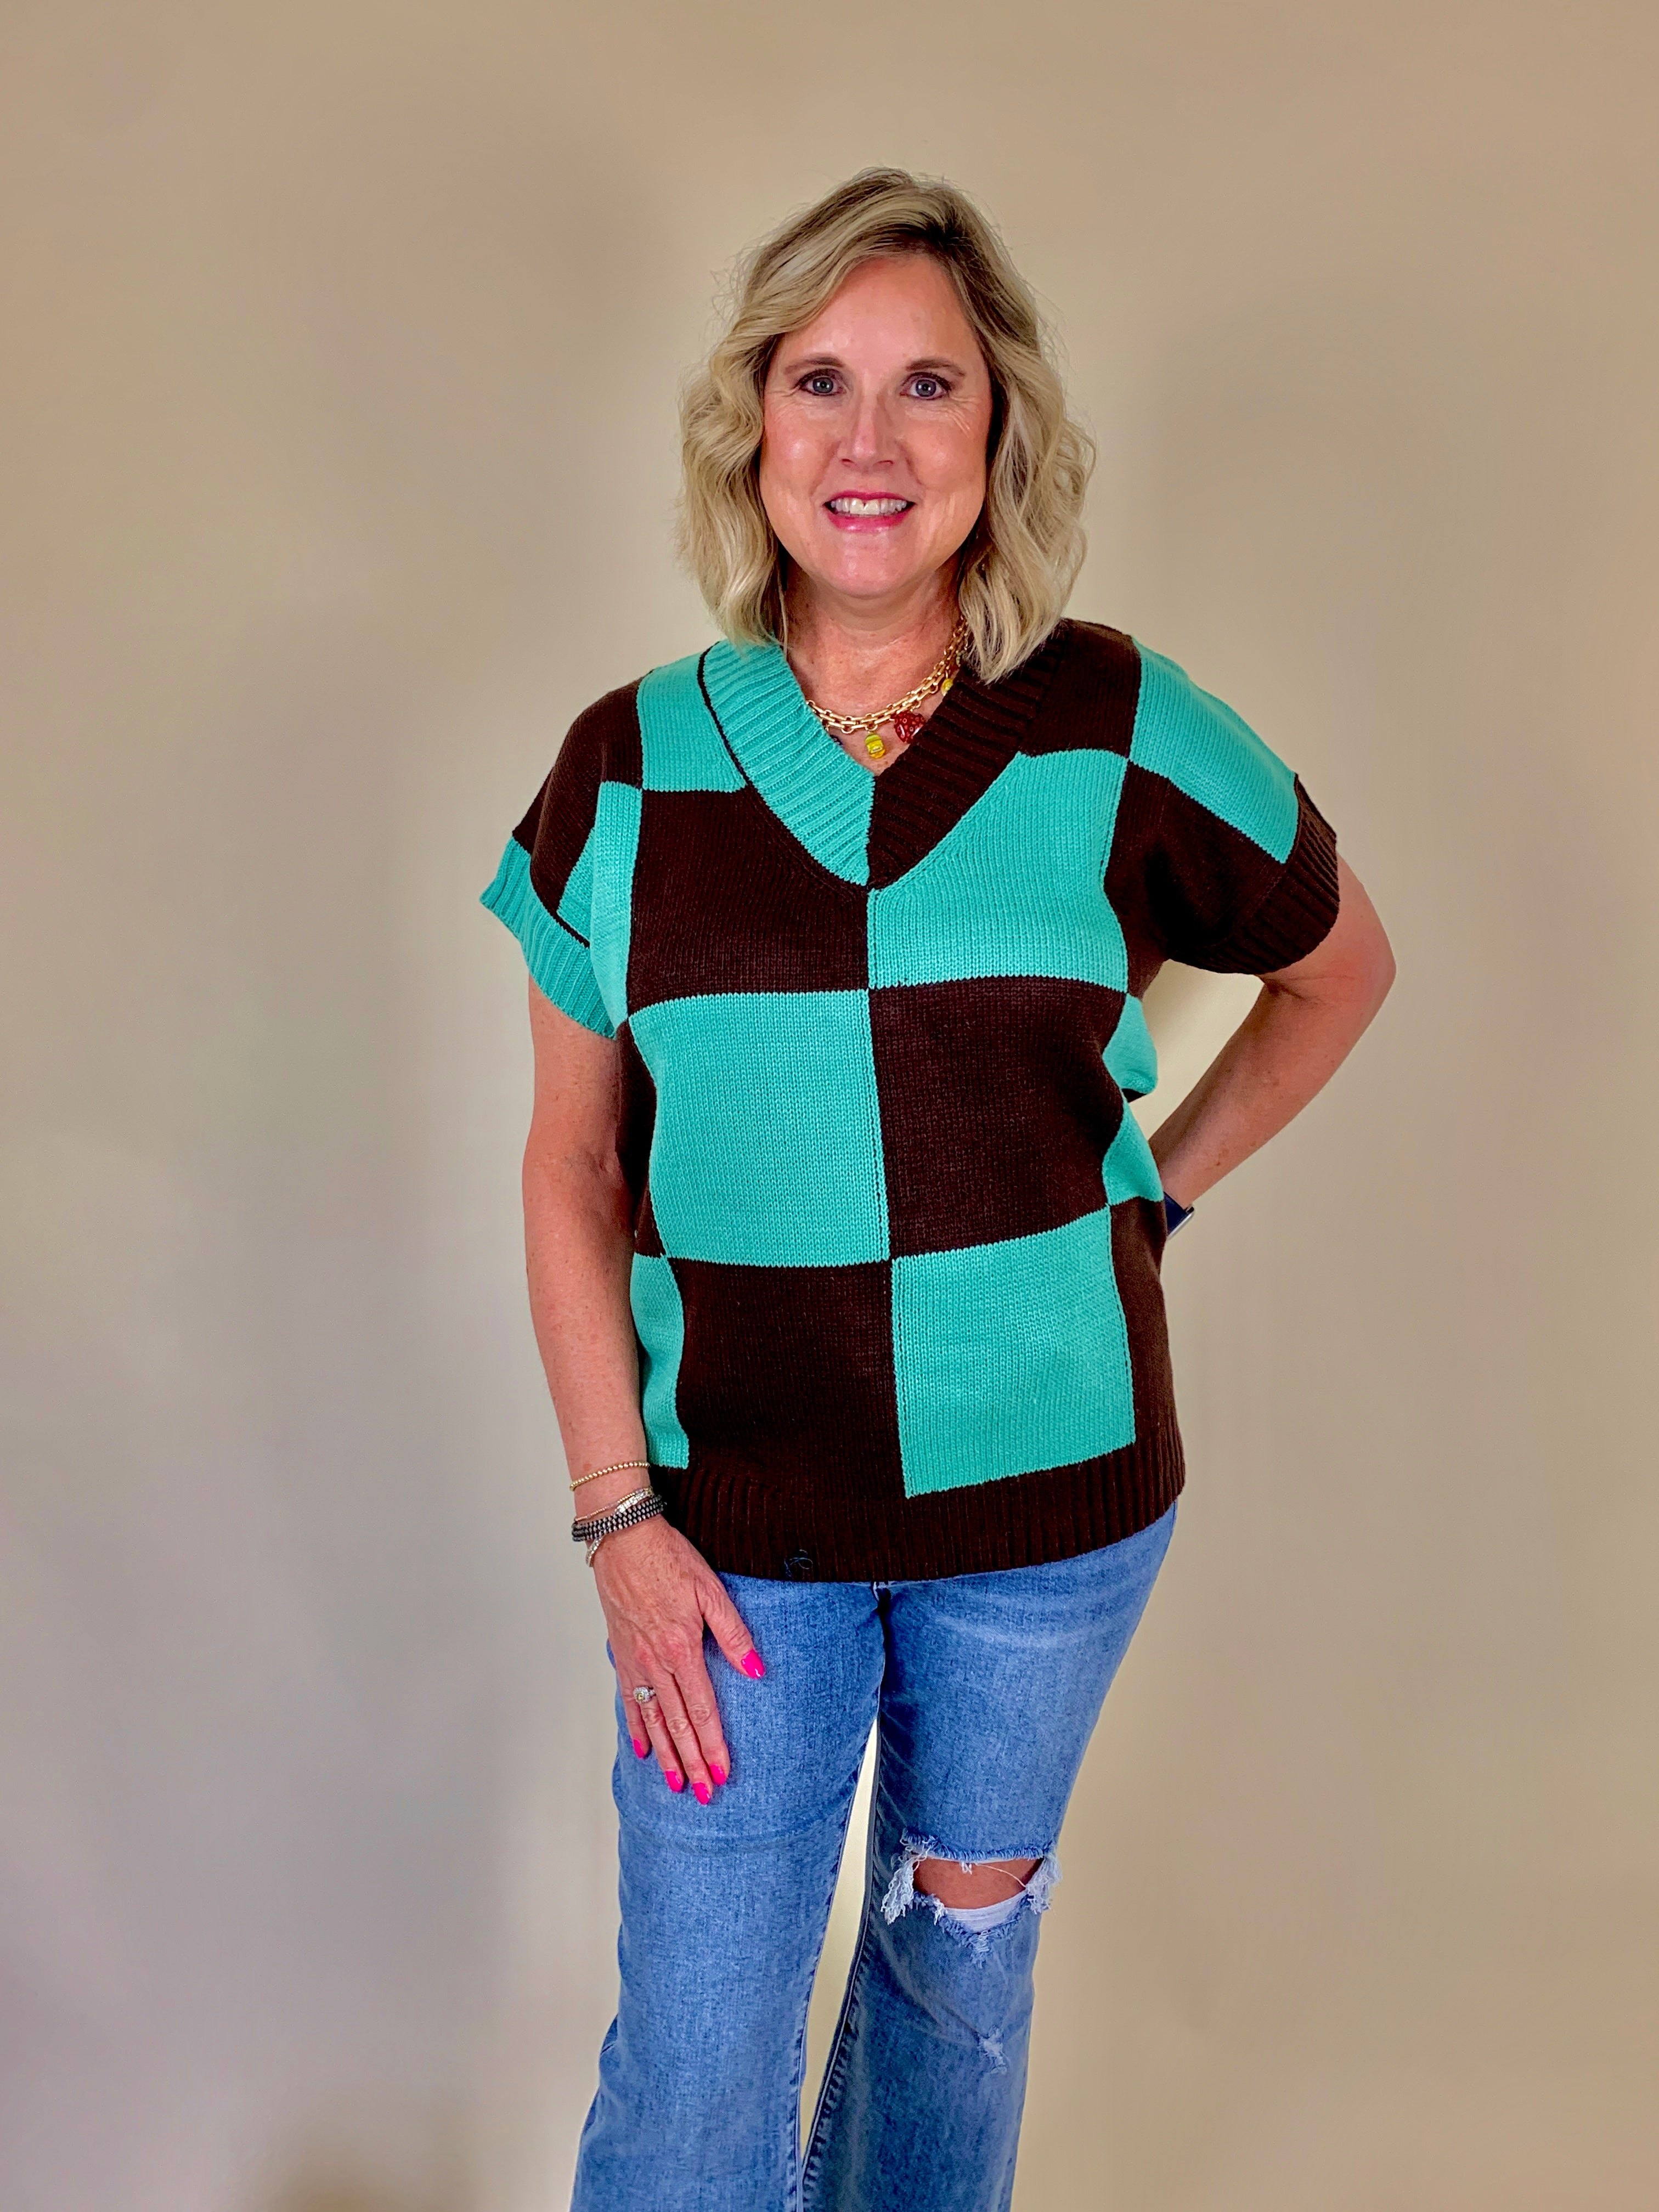 V-neck sweater with shiny checkered pattern